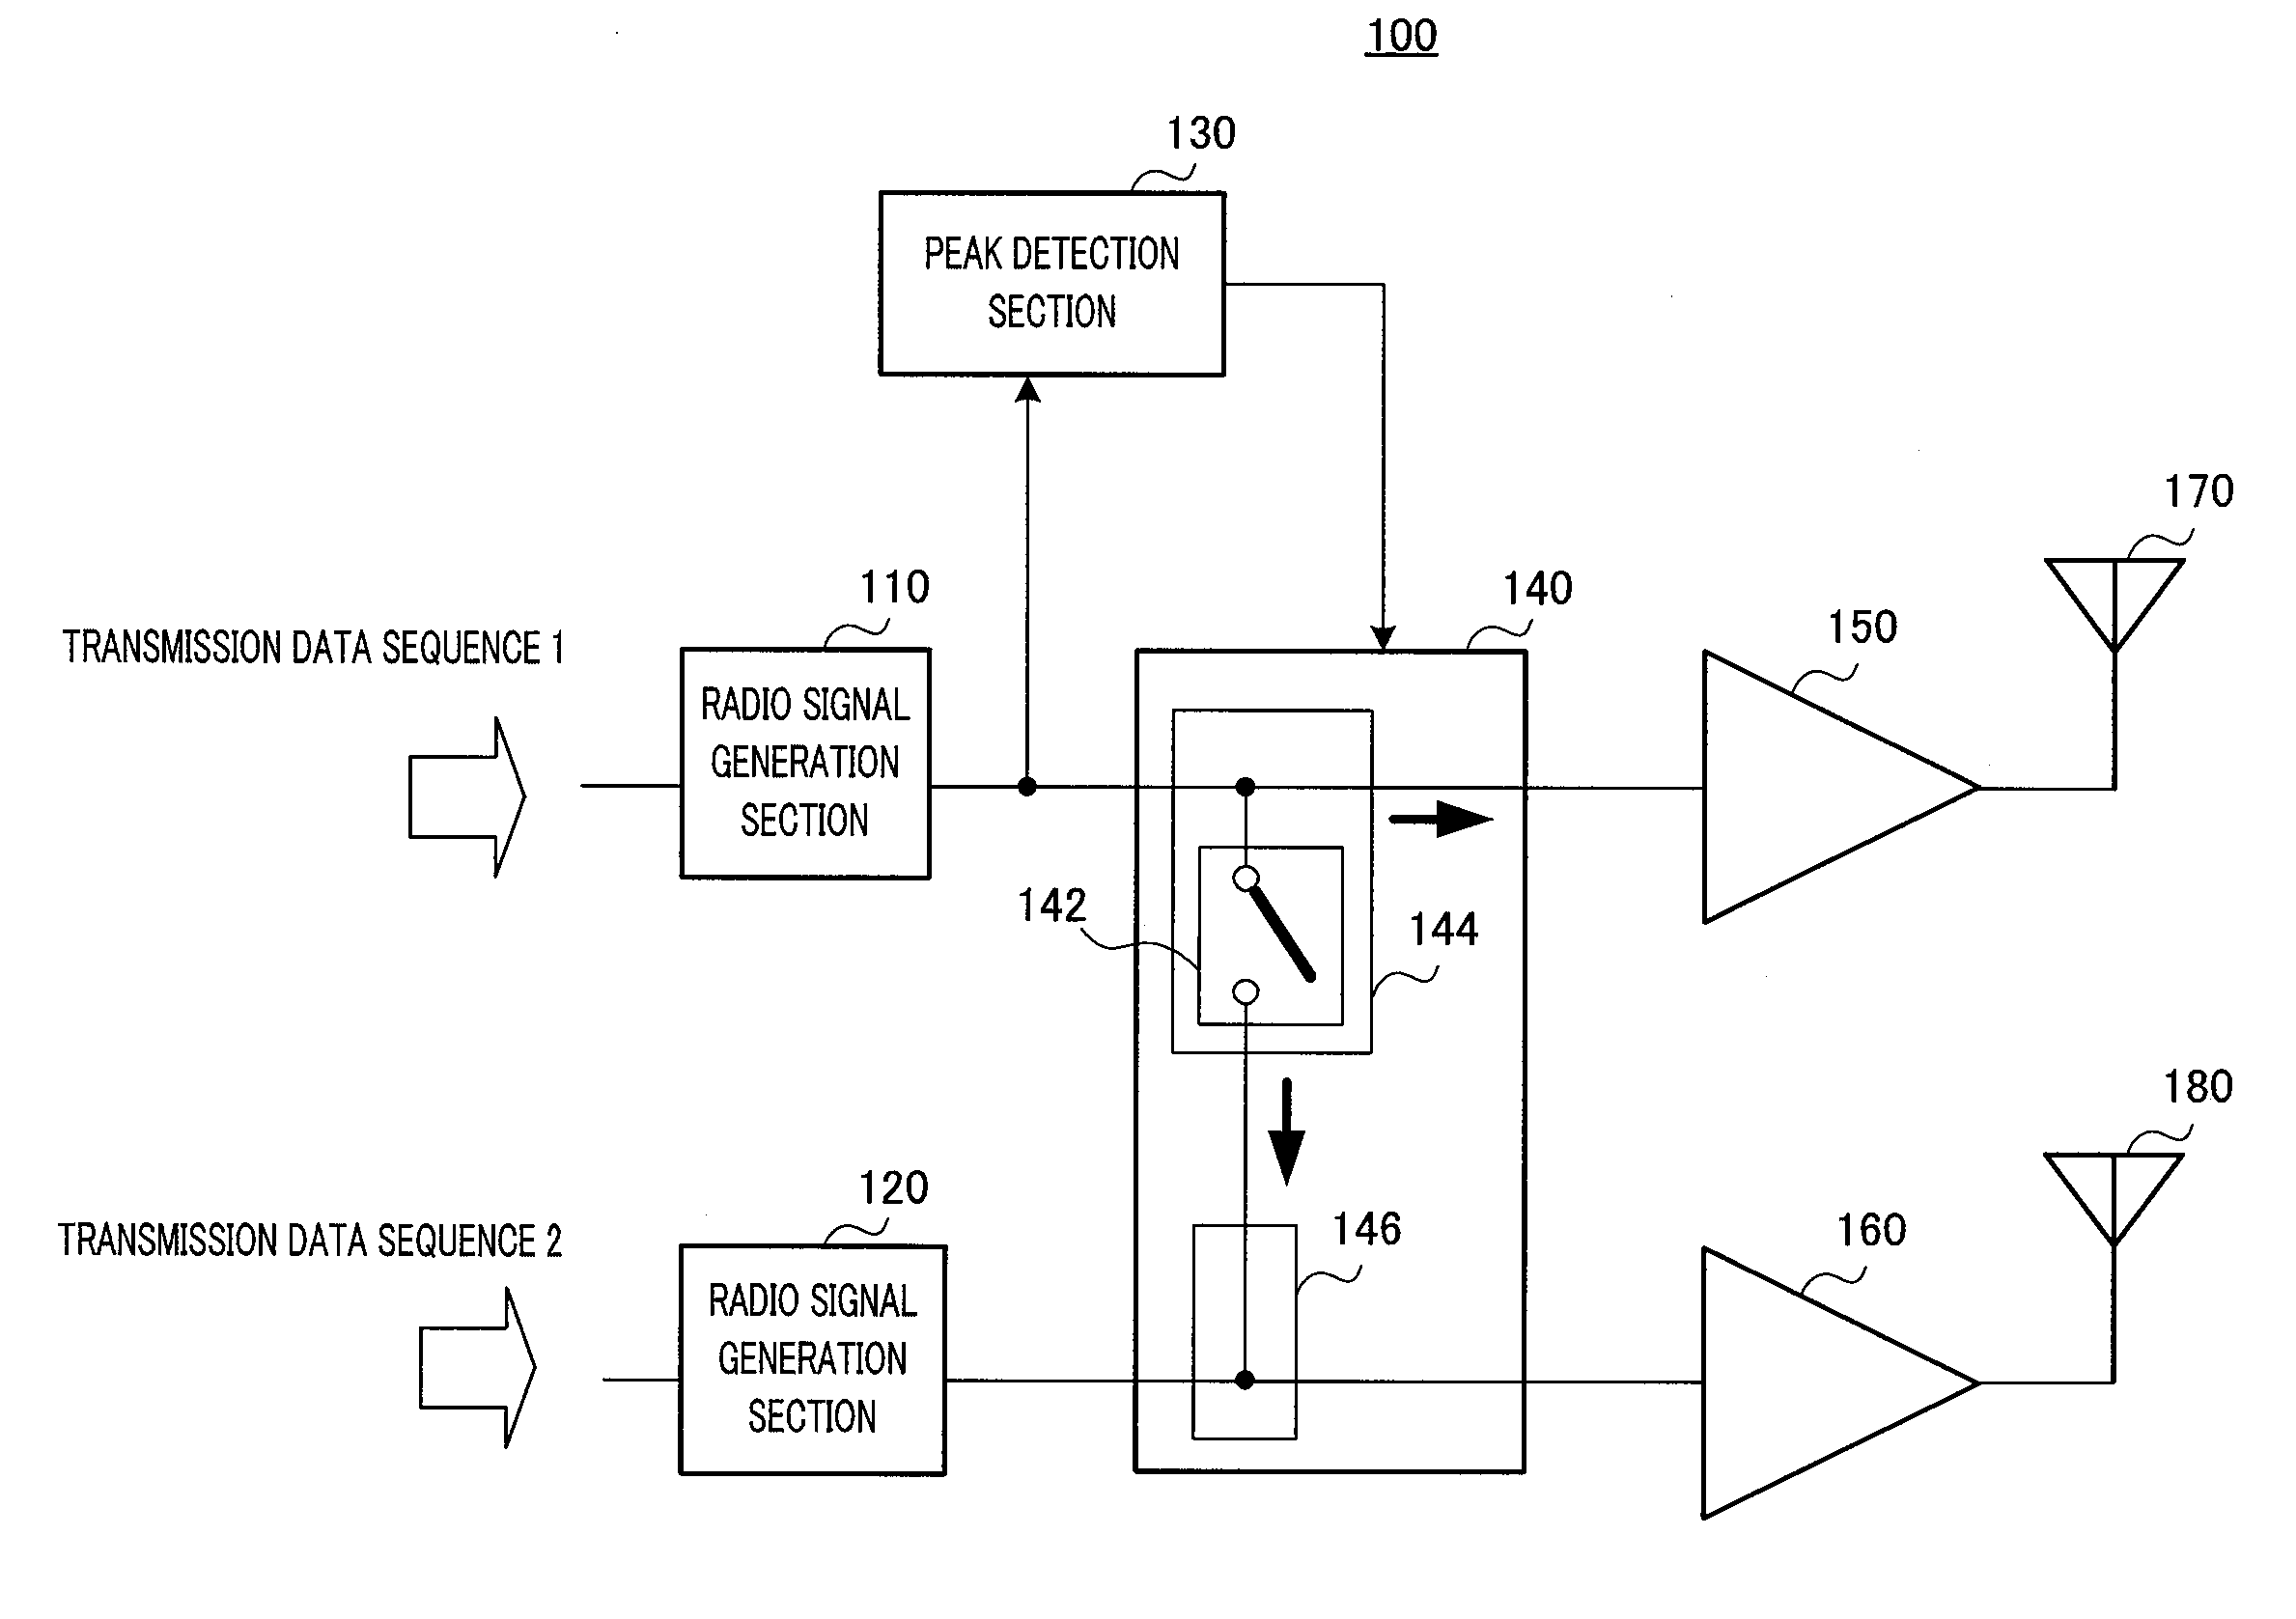 MIMO transmitter